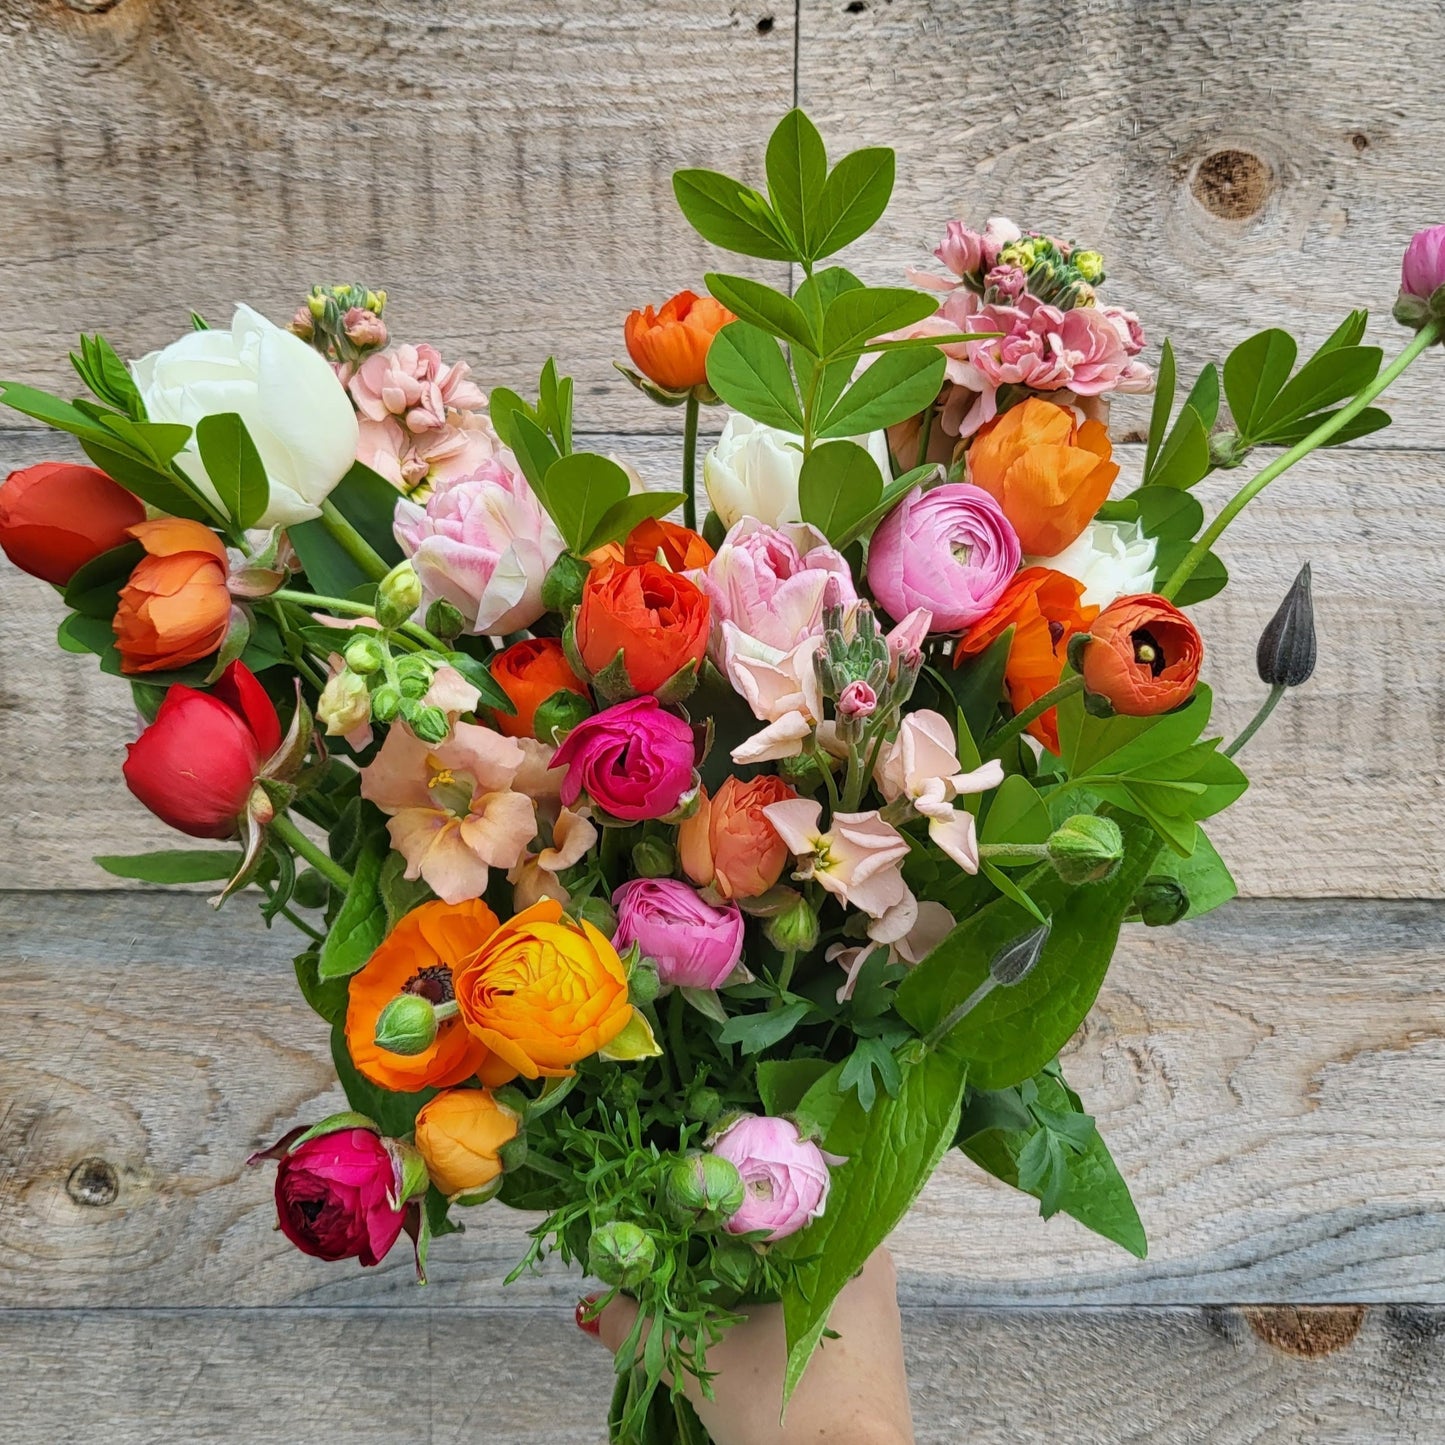 "Spring Has Sprung" 4-Bouquet Subscription